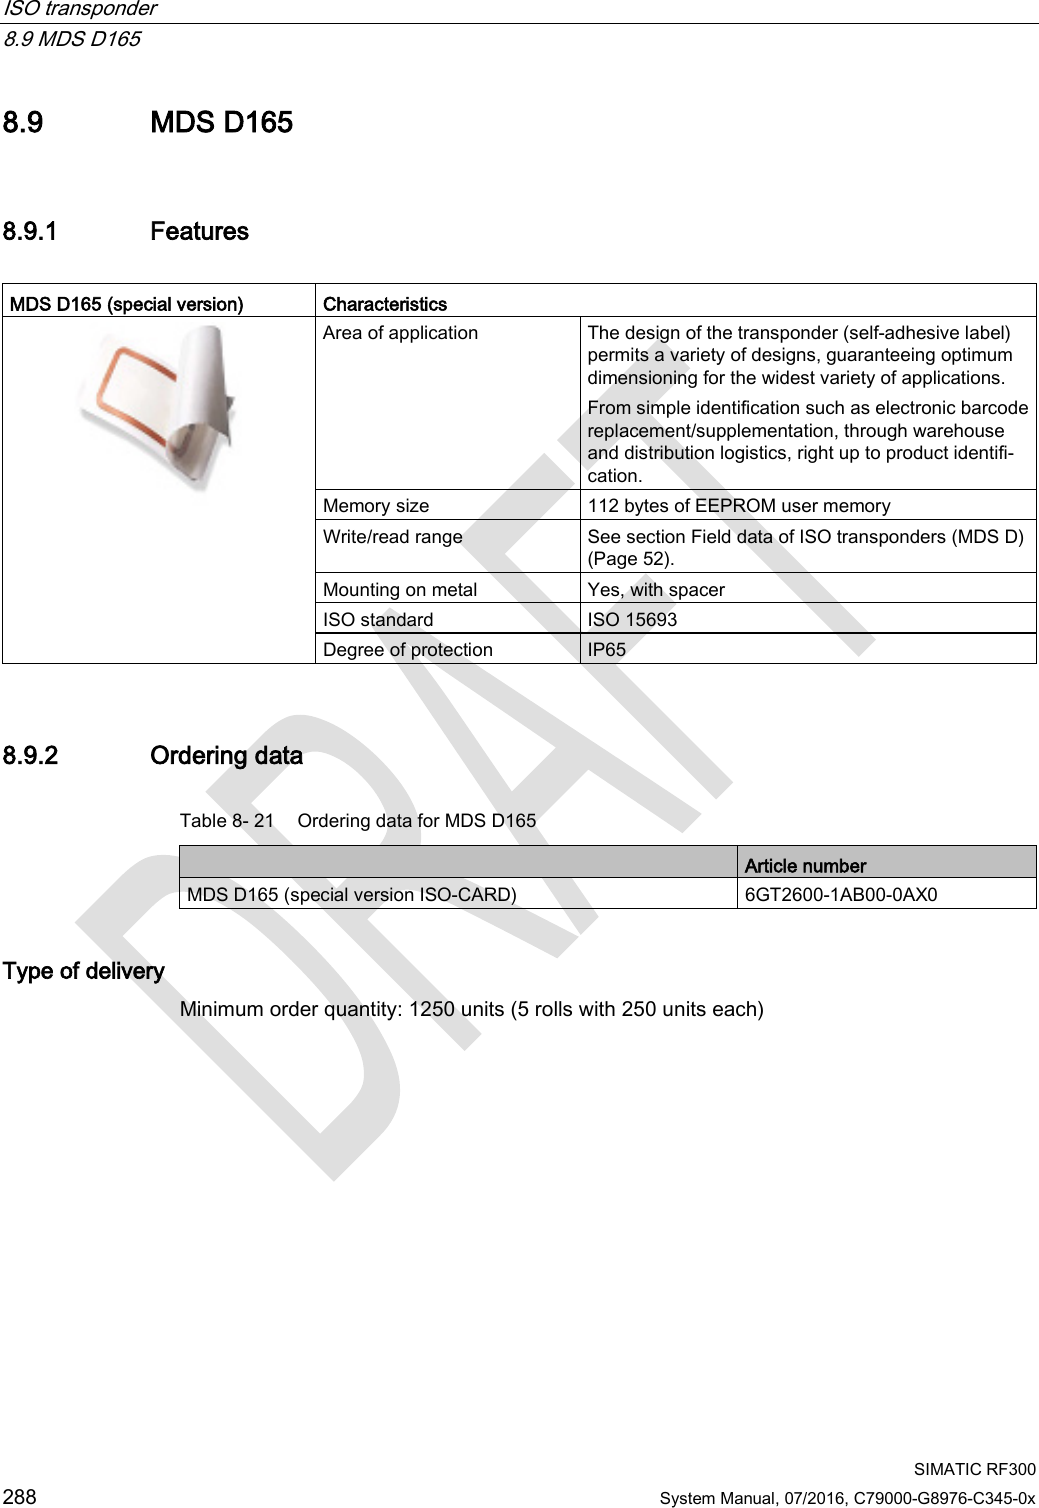 ISO transponder   8.9 MDS D165  SIMATIC RF300 288 System Manual, 07/2016, C79000-G8976-C345-0x 8.9 MDS D165 8.9.1 Features  MDS D165 (special version)  Characteristics  Area of application The design of the transponder (self-adhesive label) permits a variety of designs, guaranteeing optimum dimensioning for the widest variety of applications. From simple identification such as electronic barcode replacement/supplementation, through warehouse and distribution logistics, right up to product identifi-cation. Memory size 112 bytes of EEPROM user memory Write/read range See section Field data of ISO transponders (MDS D) (Page 52). Mounting on metal Yes, with spacer ISO standard ISO 15693 Degree of protection IP65 8.9.2 Ordering data Table 8- 21 Ordering data for MDS D165  Article number MDS D165 (special version ISO-CARD) 6GT2600-1AB00-0AX0 Type of delivery Minimum order quantity: 1250 units (5 rolls with 250 units each) 